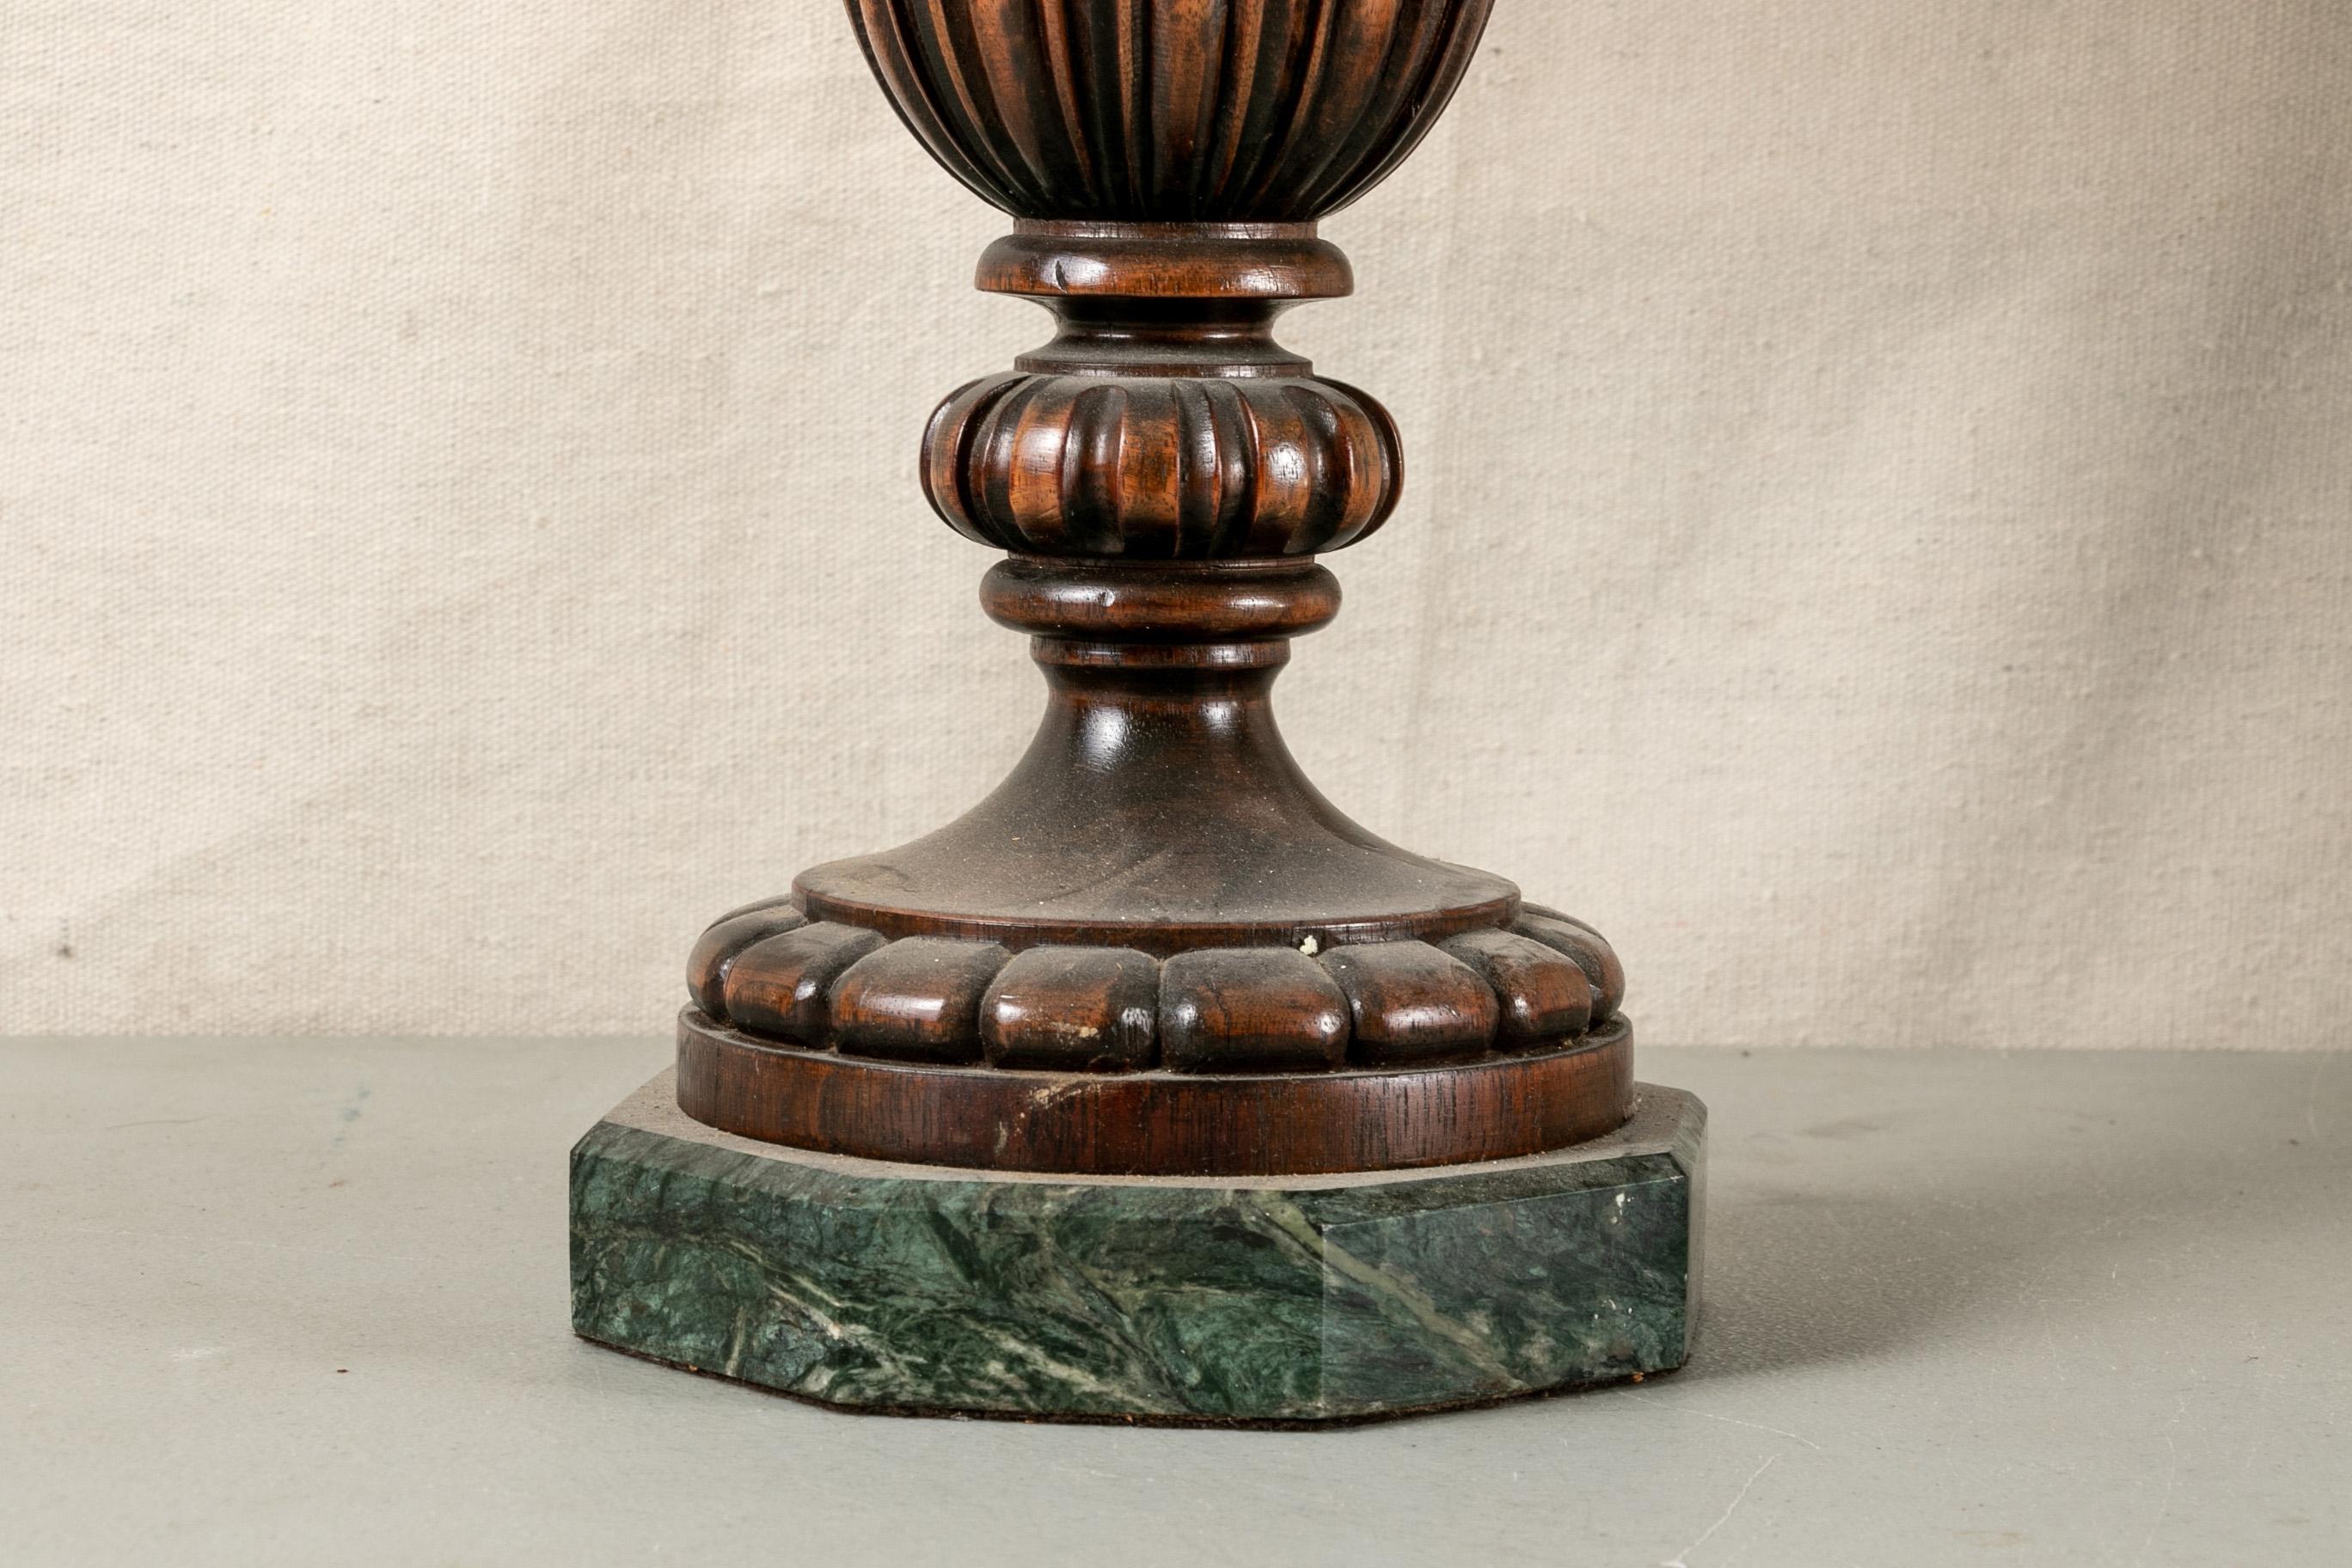 Pair of carved mahogany table lamps, three light fluted urn form lamps with turned tops and flared bases. Mounted on octagonal green marble bases. With a fine old patina. Green on ecru leafy printed and pleated shades. 

Condition: Expected wear